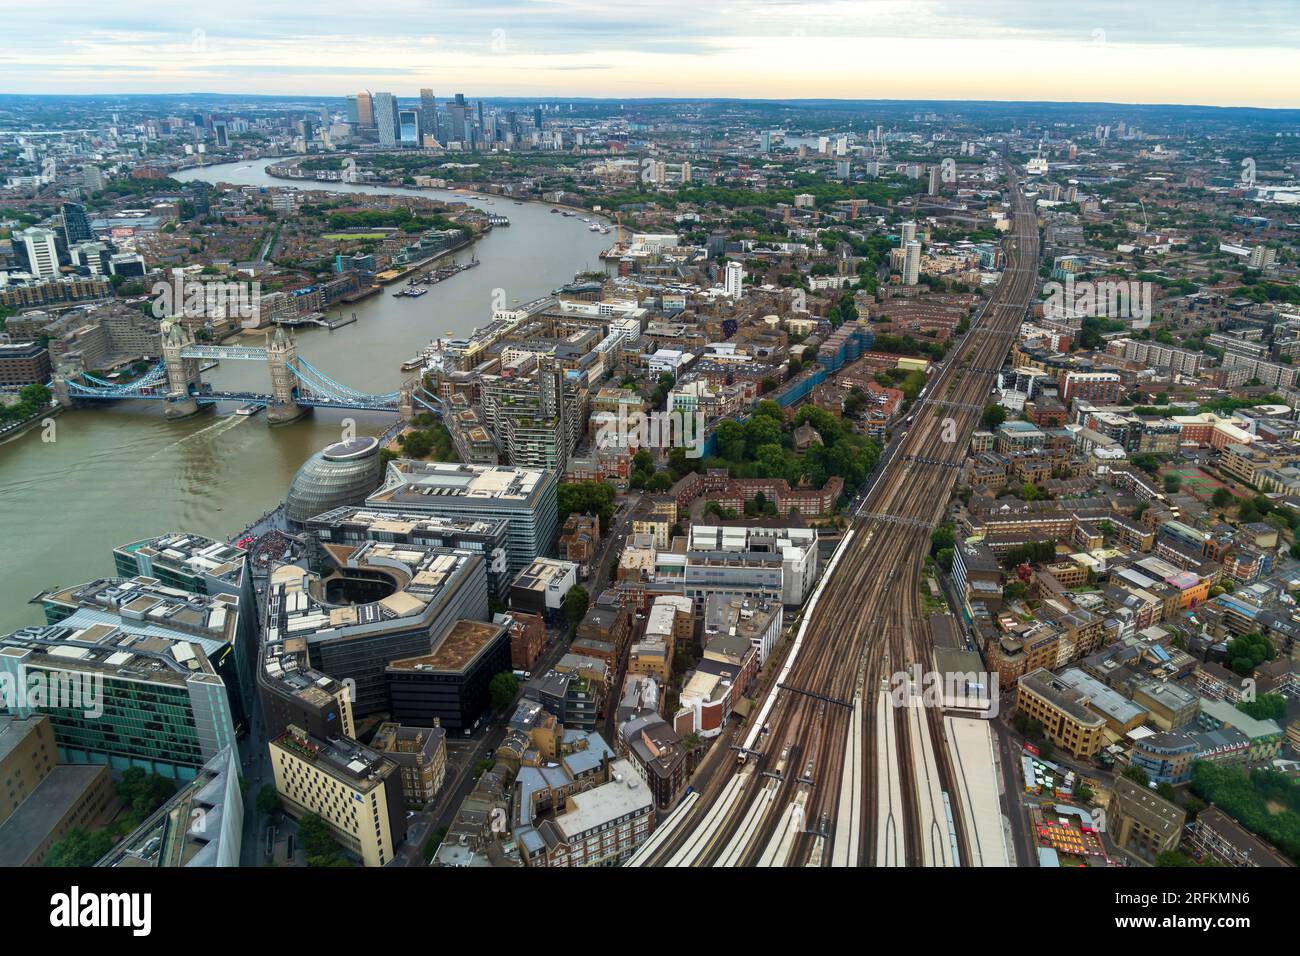 London, England, UK - July 26, 2023. Aerial panoramic view, a cityscape of the modern London skyline with boats on the River Thames and Tower Bridge. Stock Photo